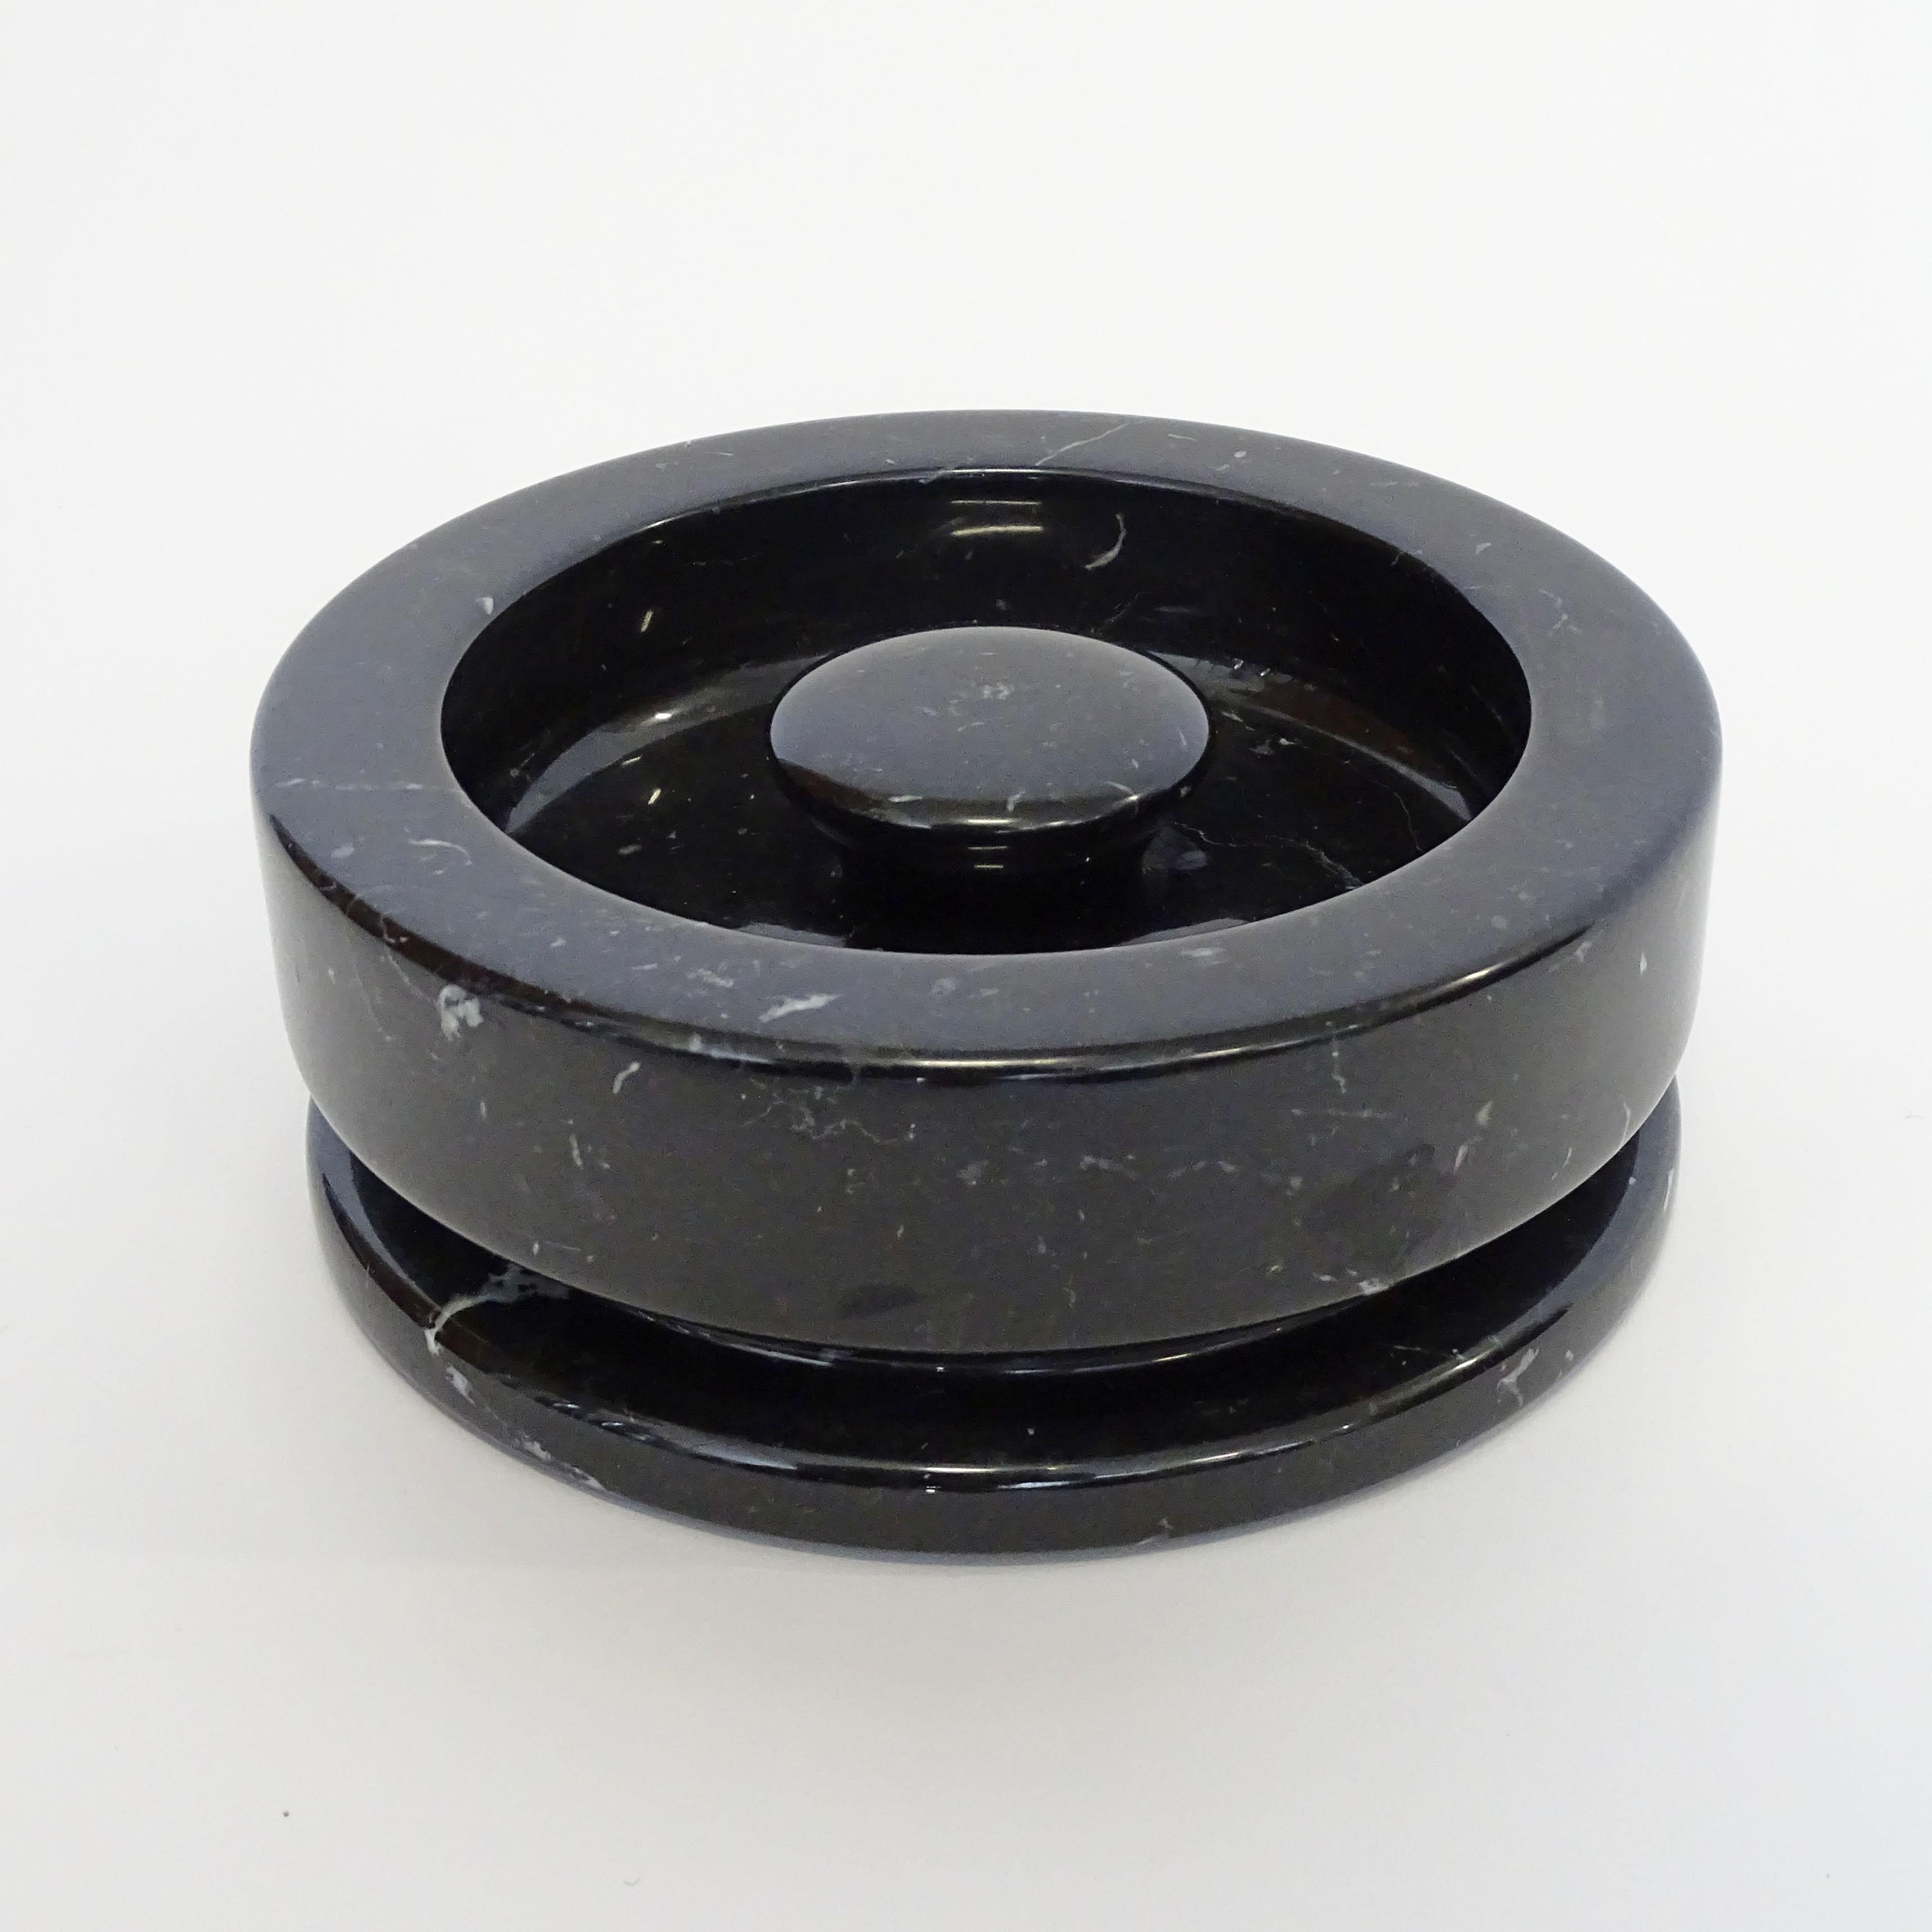 Mid-Century Modern Angelo Mangiarotti Black Marble Ashtray for Knoll, Italy 1960s For Sale